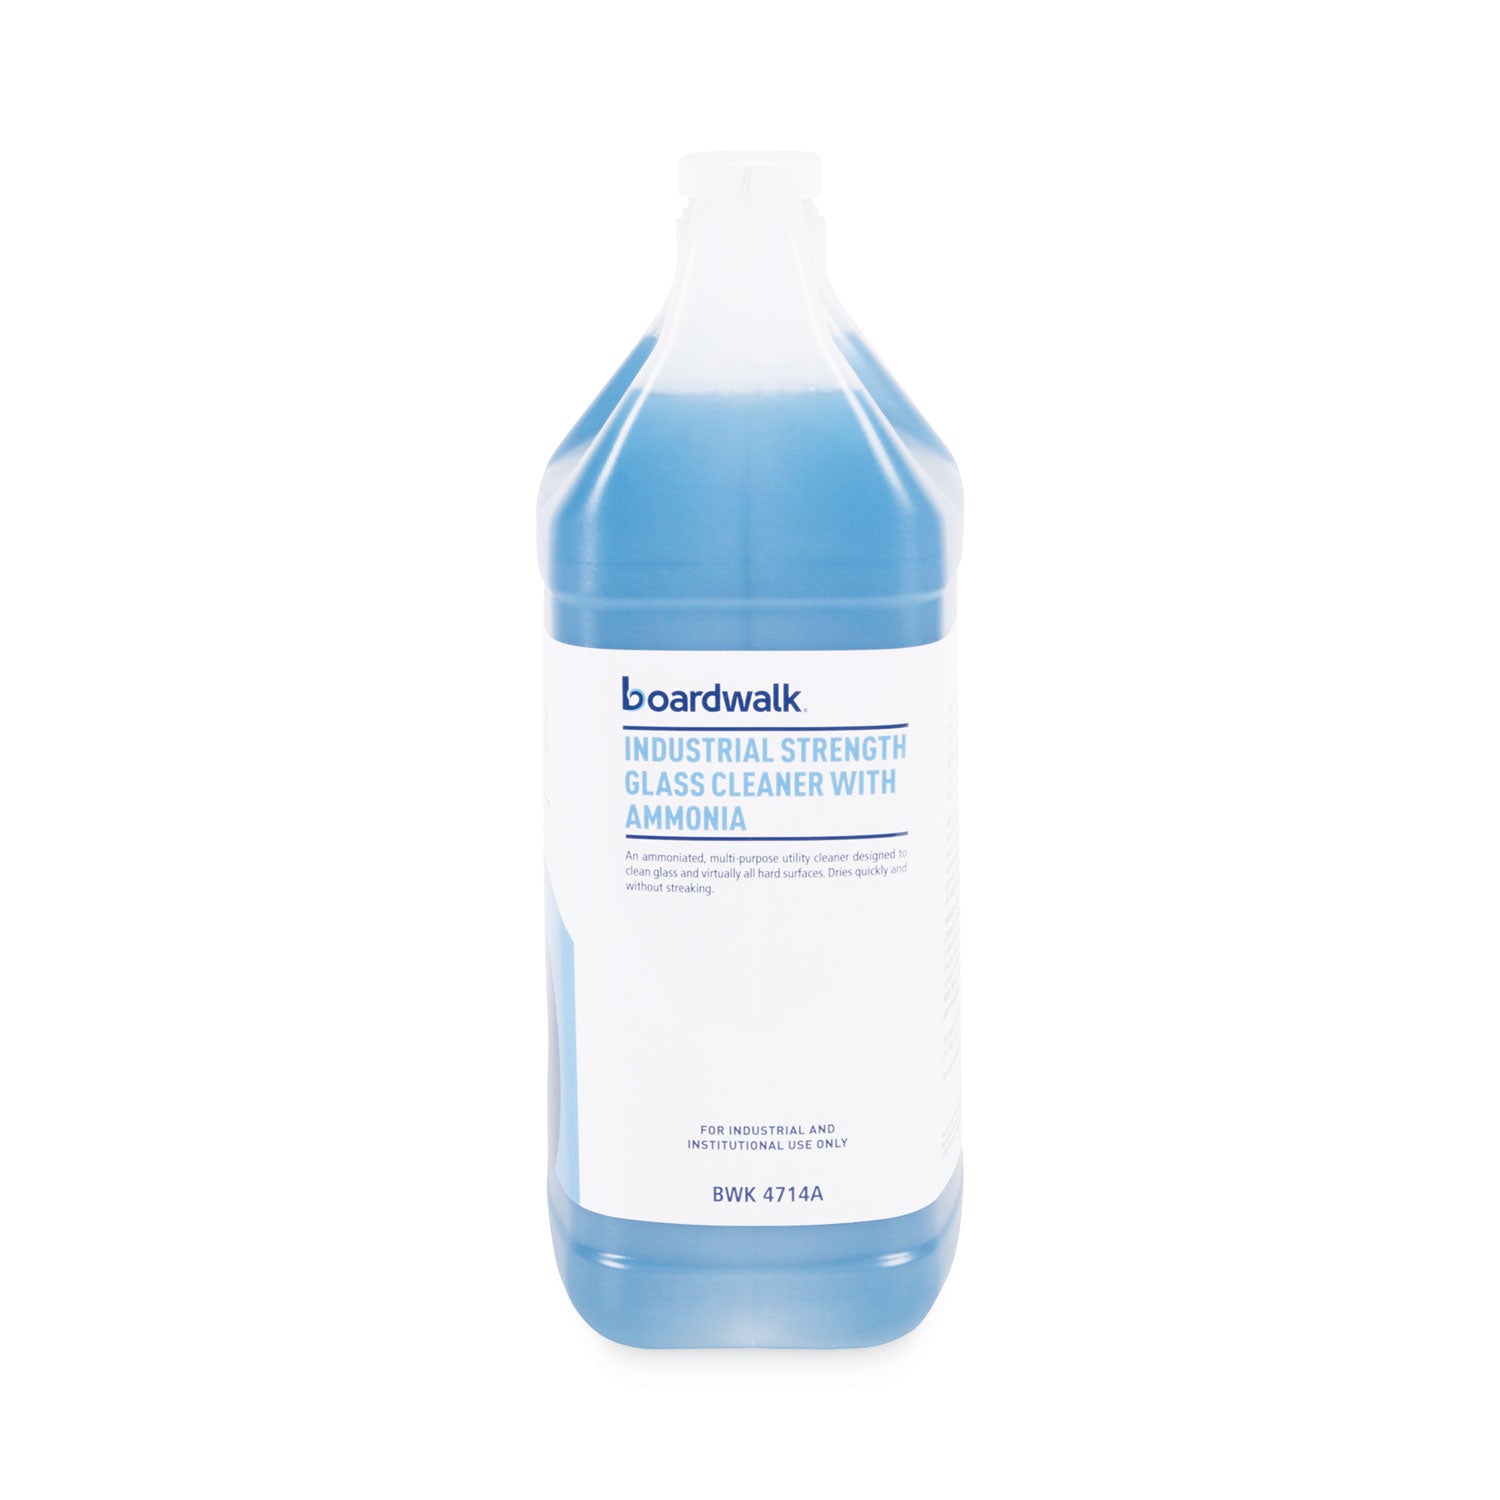 industrial-strength-glass-cleaner-with-ammonia-1-gal-bottle_bwk4714aea - 4